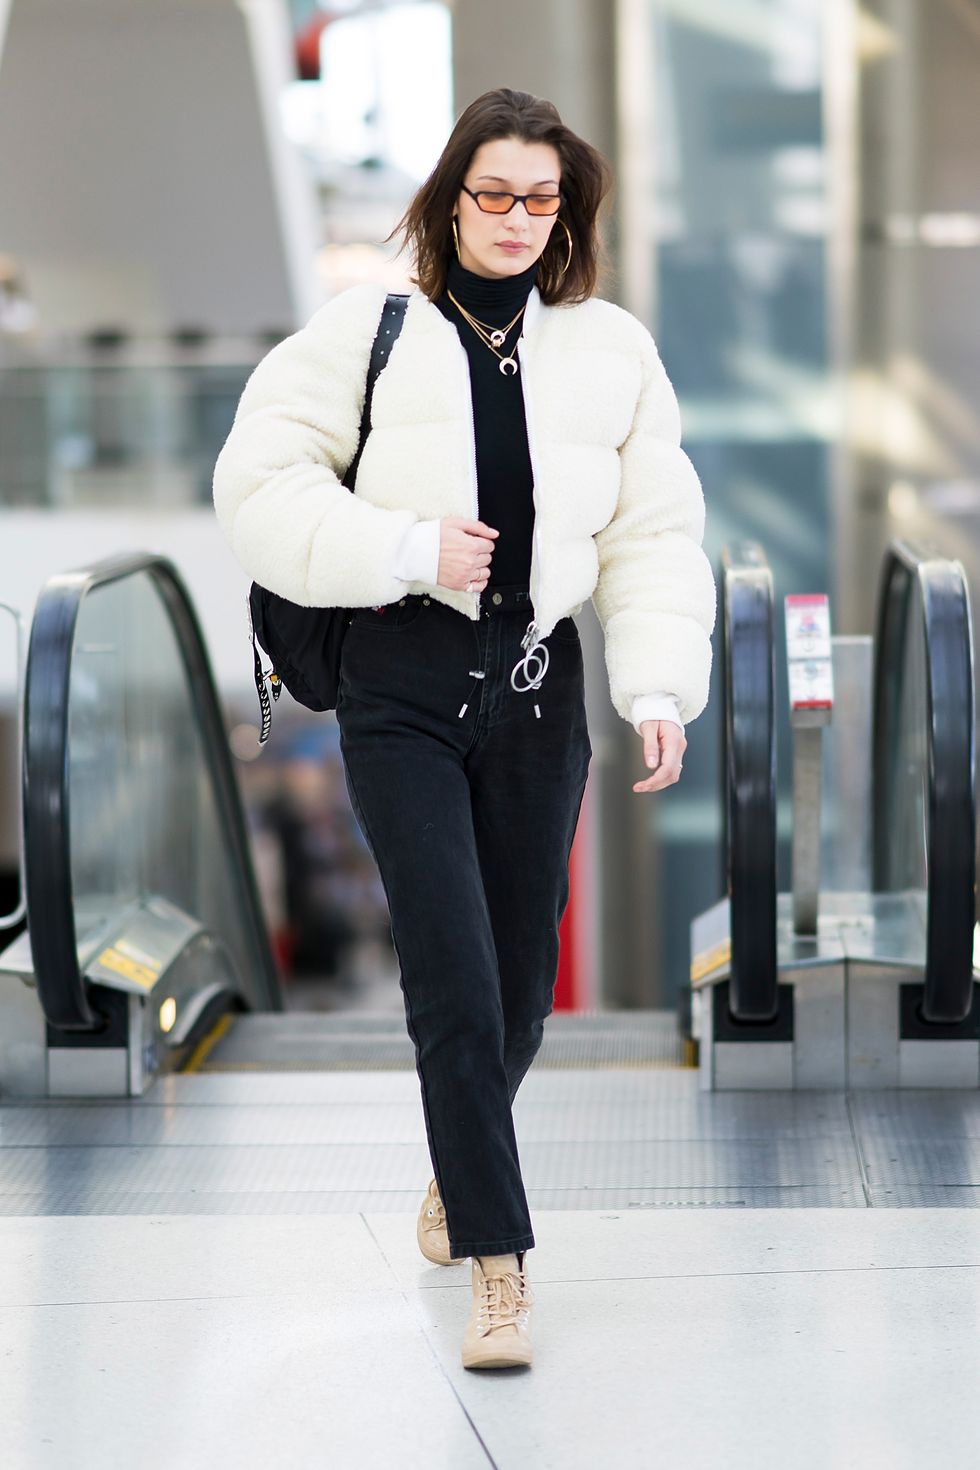 Every Stylish Celebrity We Know Travels With This Luggage